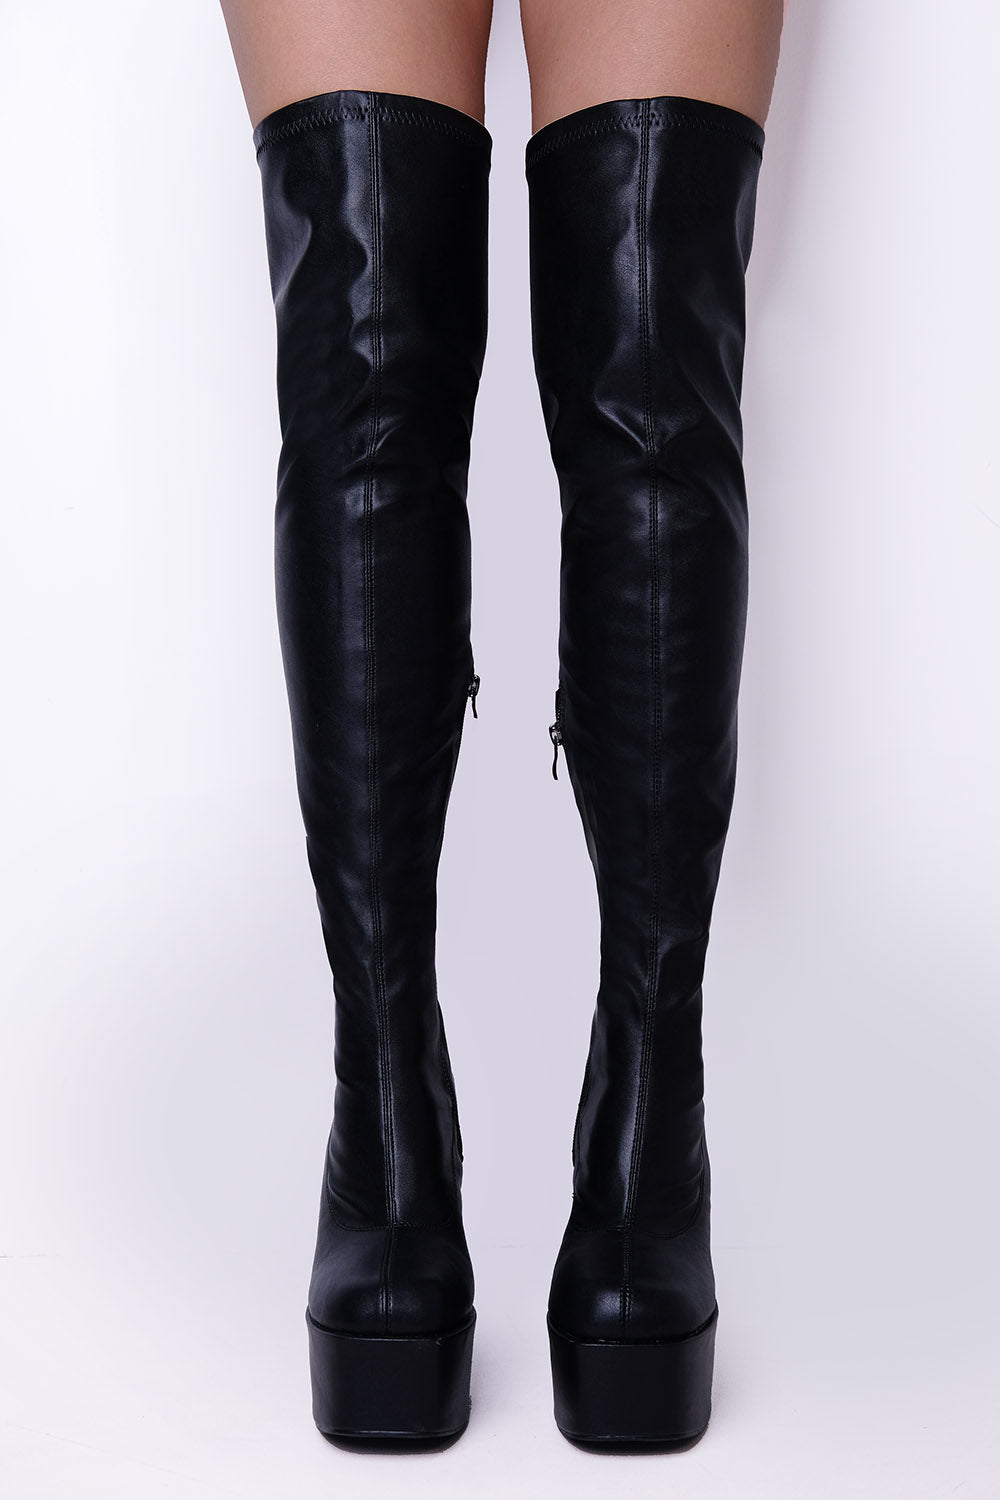 Black PU Block Heel Knee High Boots With Square Toe